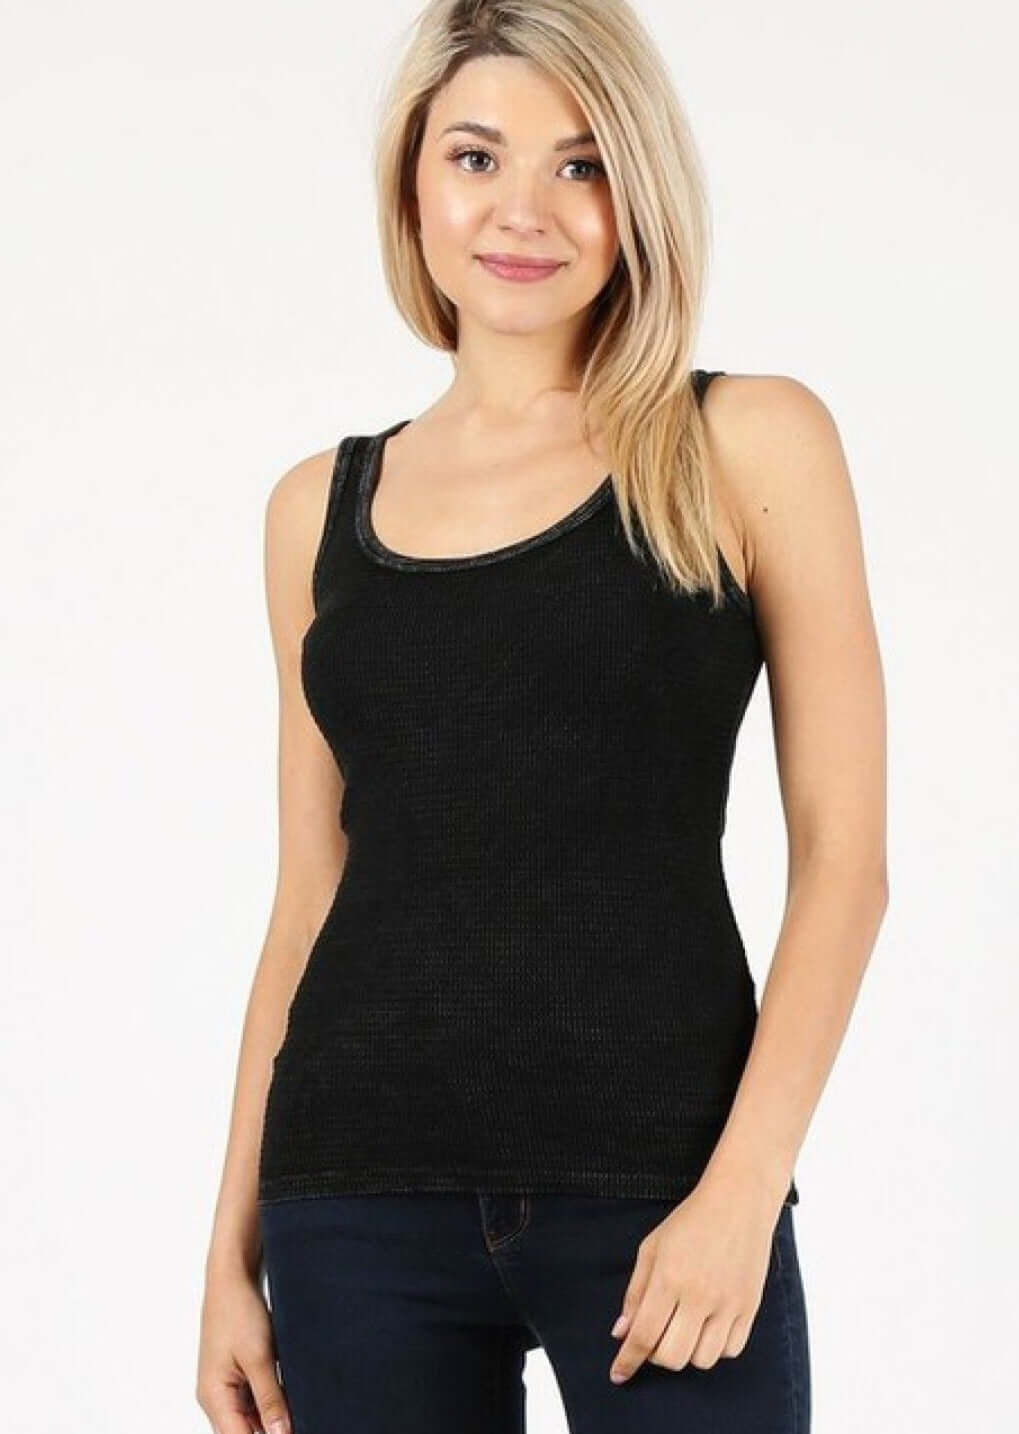 Made in USA Women's Scoop Neck Tank Textured Breathable Thicker Material Garment Washed Fabric Fitted Waist Length 100% Cotton in Black